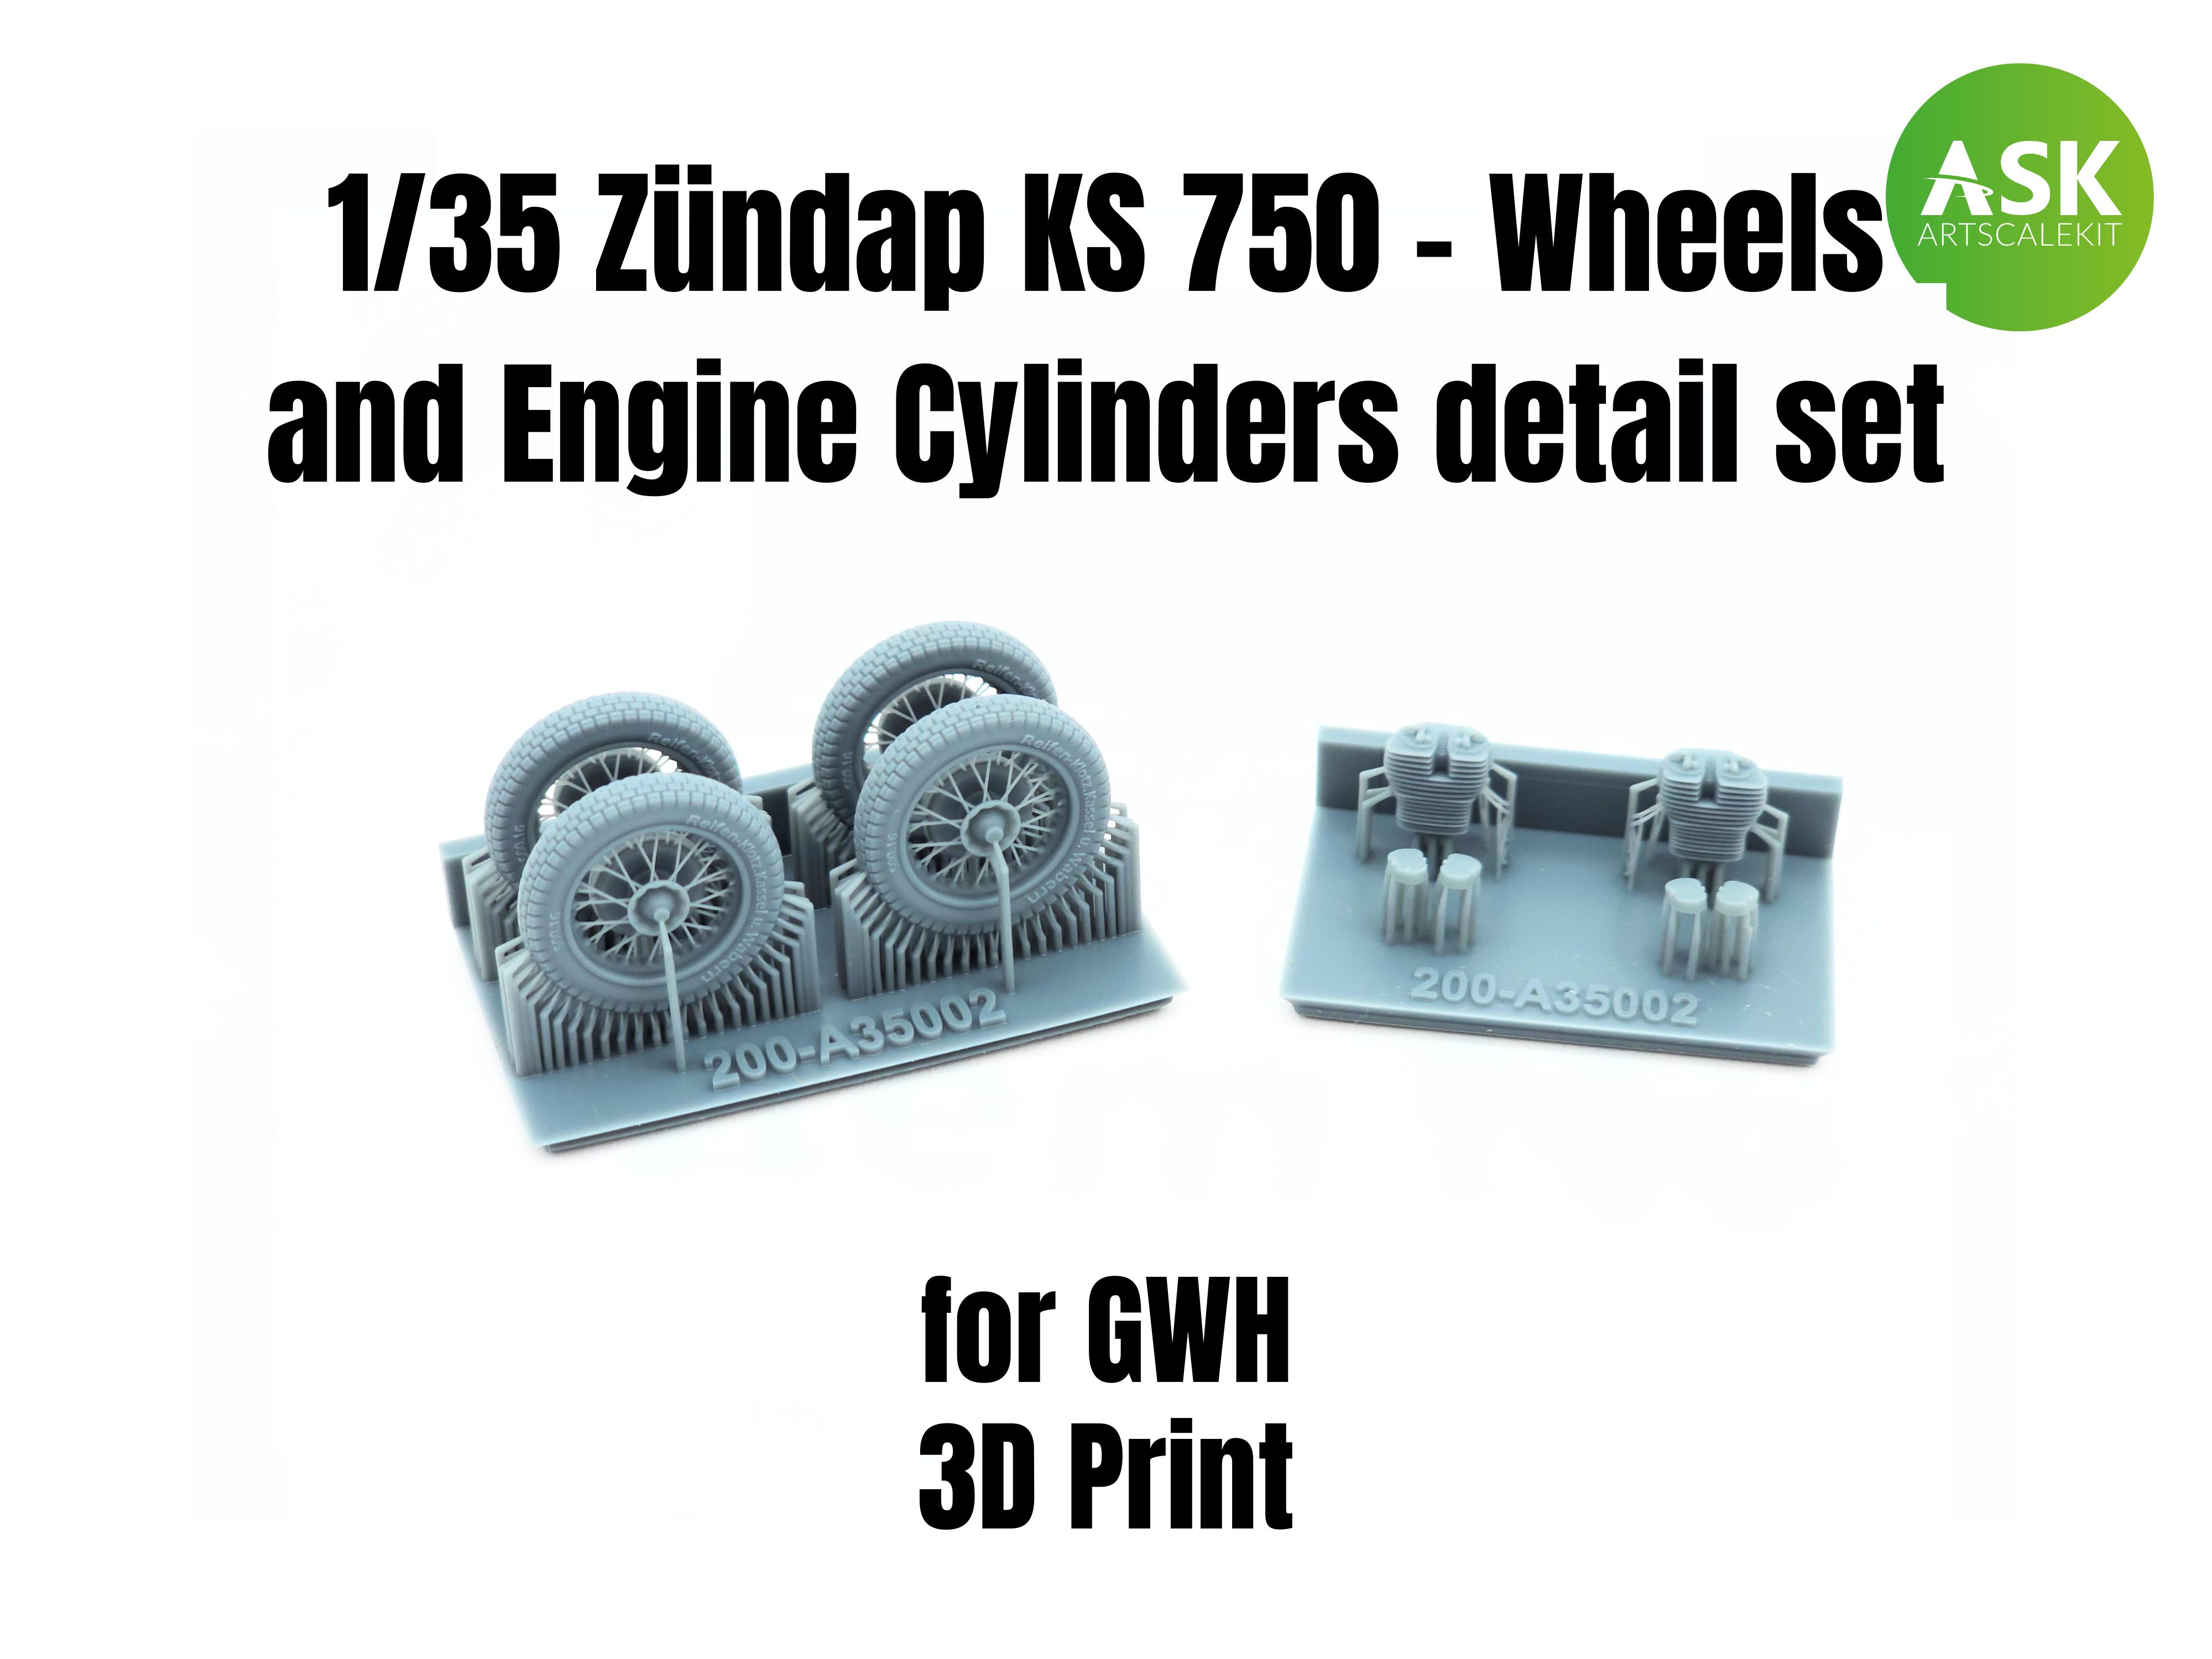 1/35 Zündap KS 750 - Wheels and Engine Cylinders detail set recommended for GWH